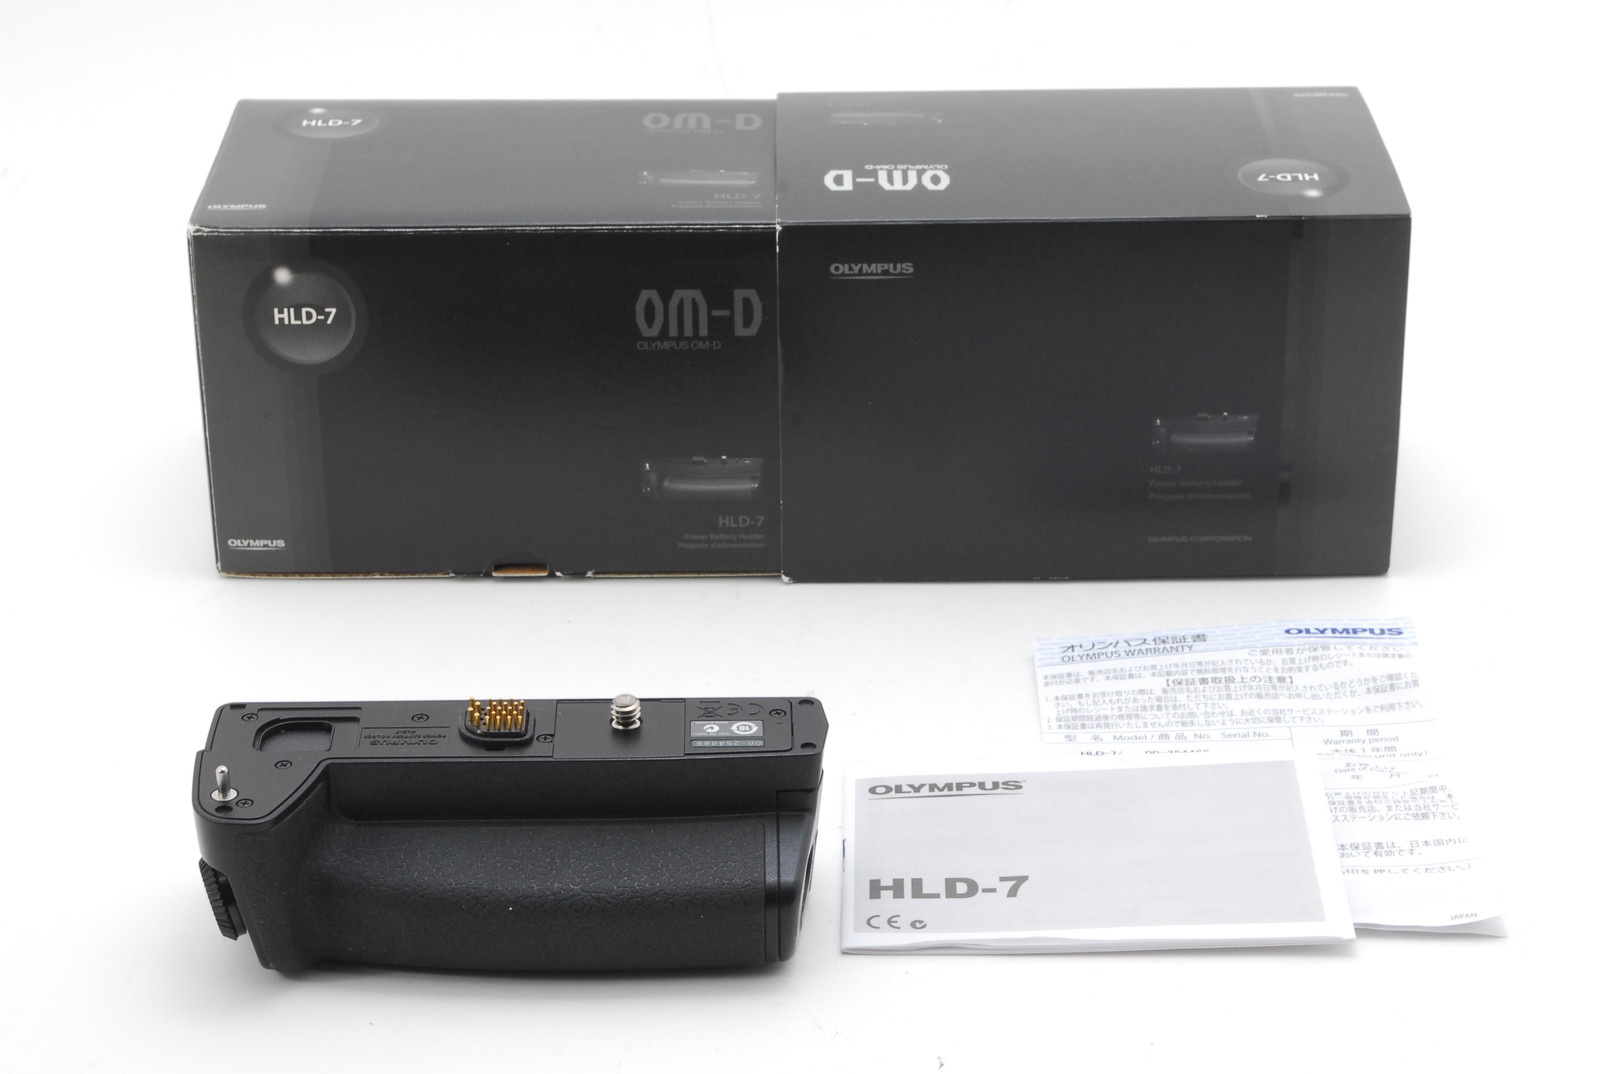 PROMOTION. TOP MINT Olympus HLD-7 Battery Grip for OM-D E-M1, Box, Manual from Japan